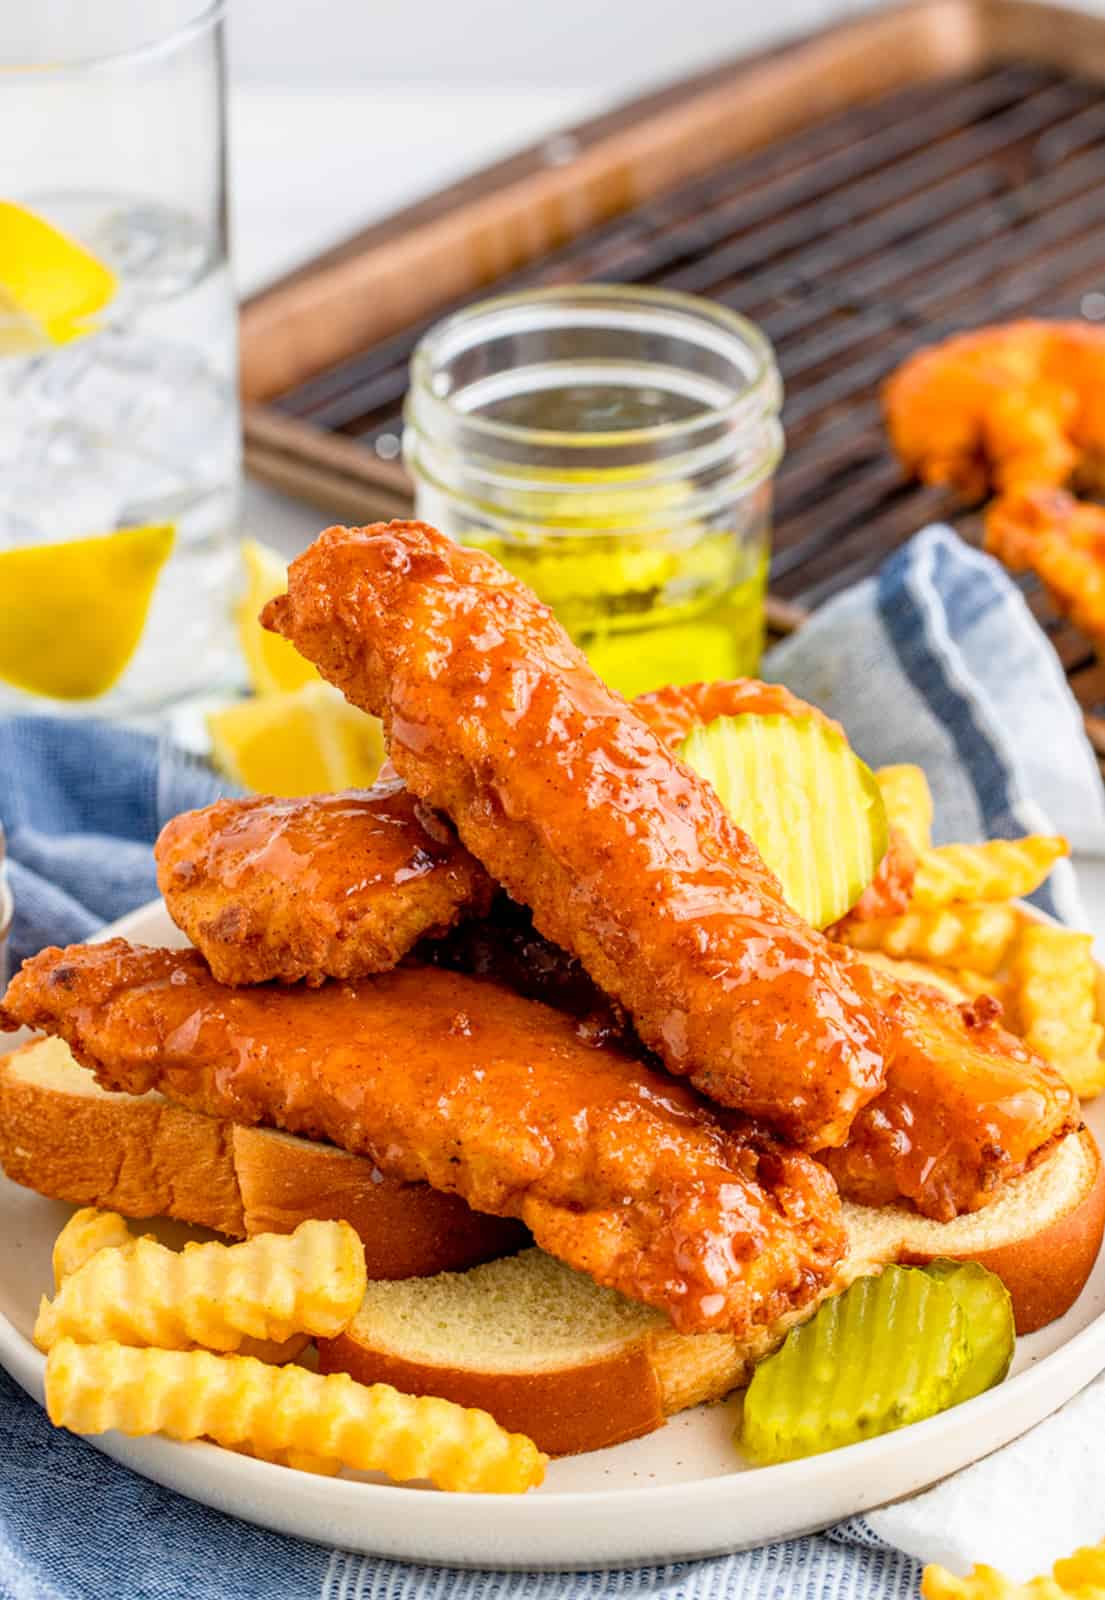 Nashville Hot Chicken Tenders stacked on plate with bread, fries and pickles.